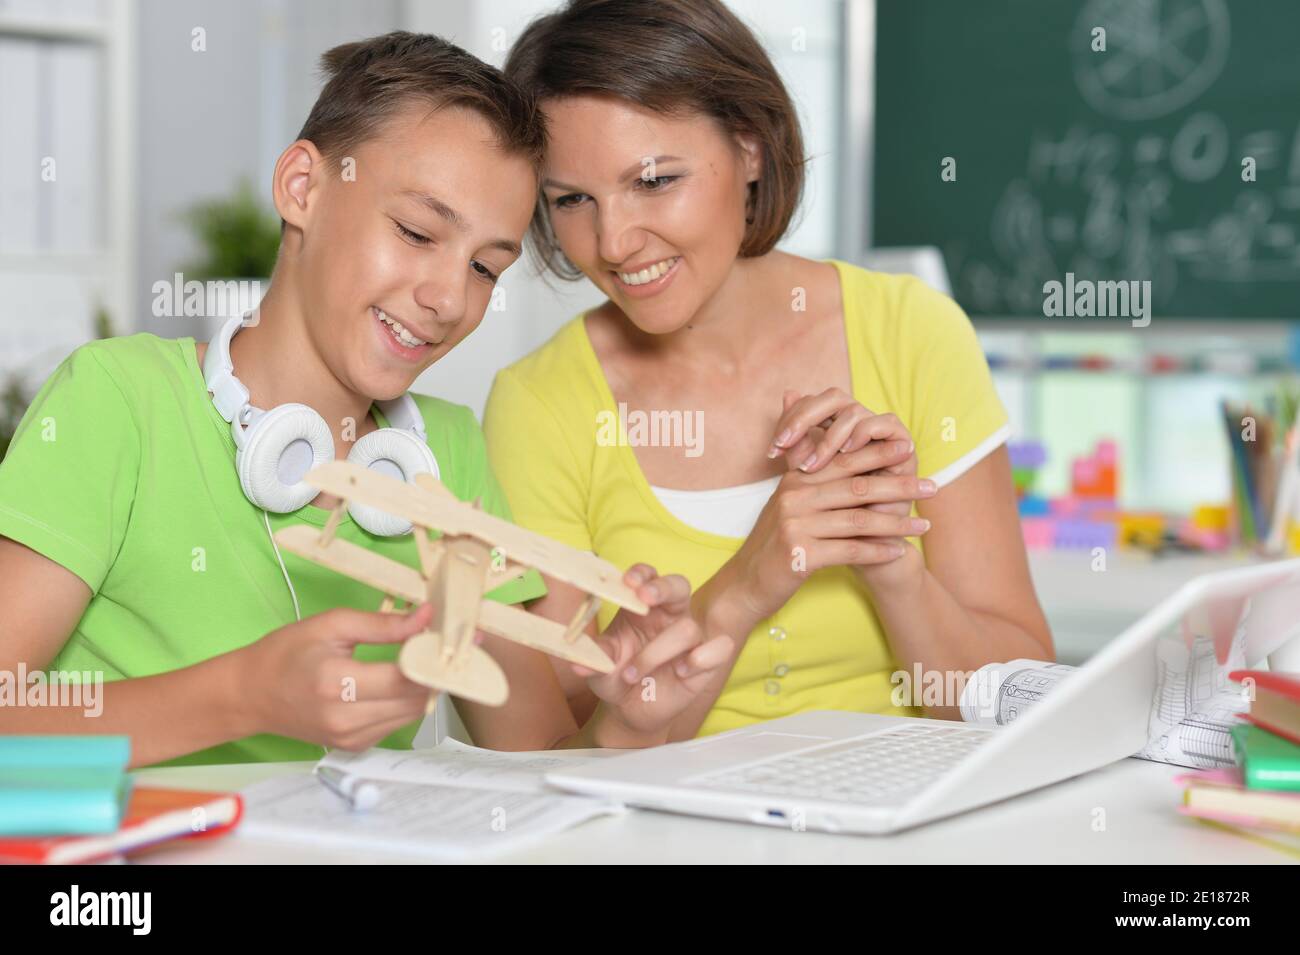 Young mother and cute son constructing with toy plane Stock Photo